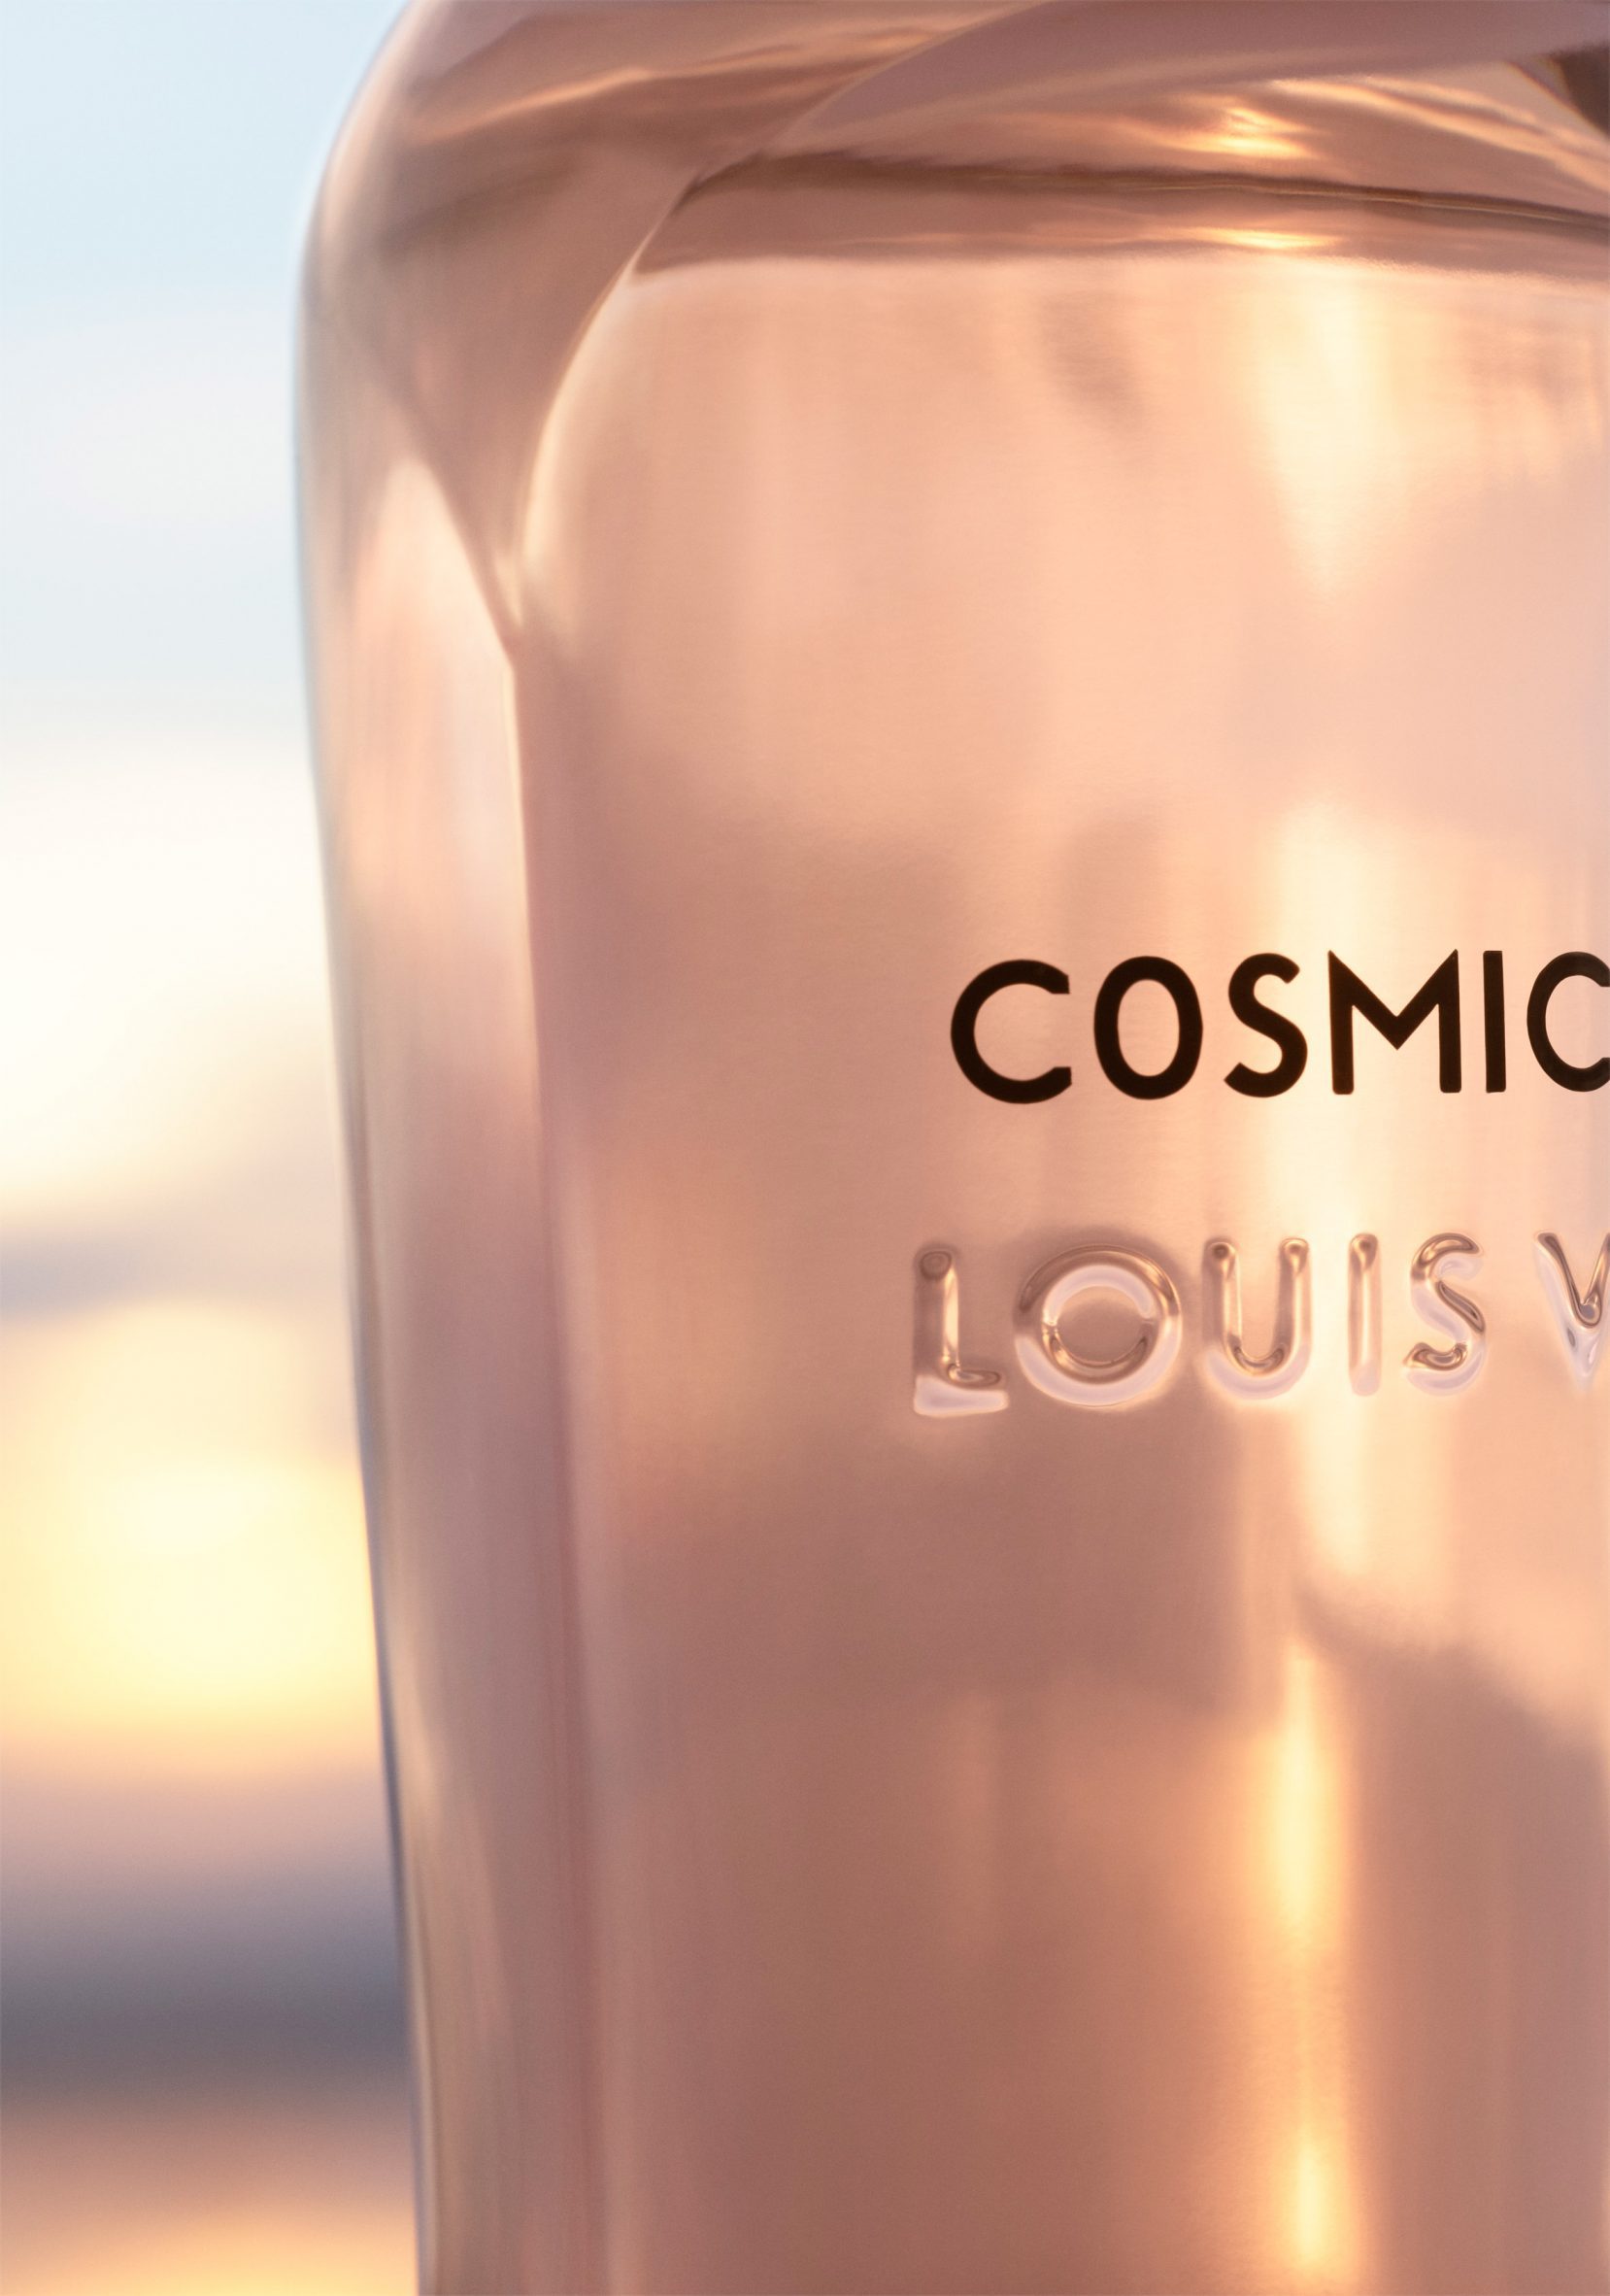 Louis Vuitton and Frank Gehry Collaborate on New Fragrance Project – WWD